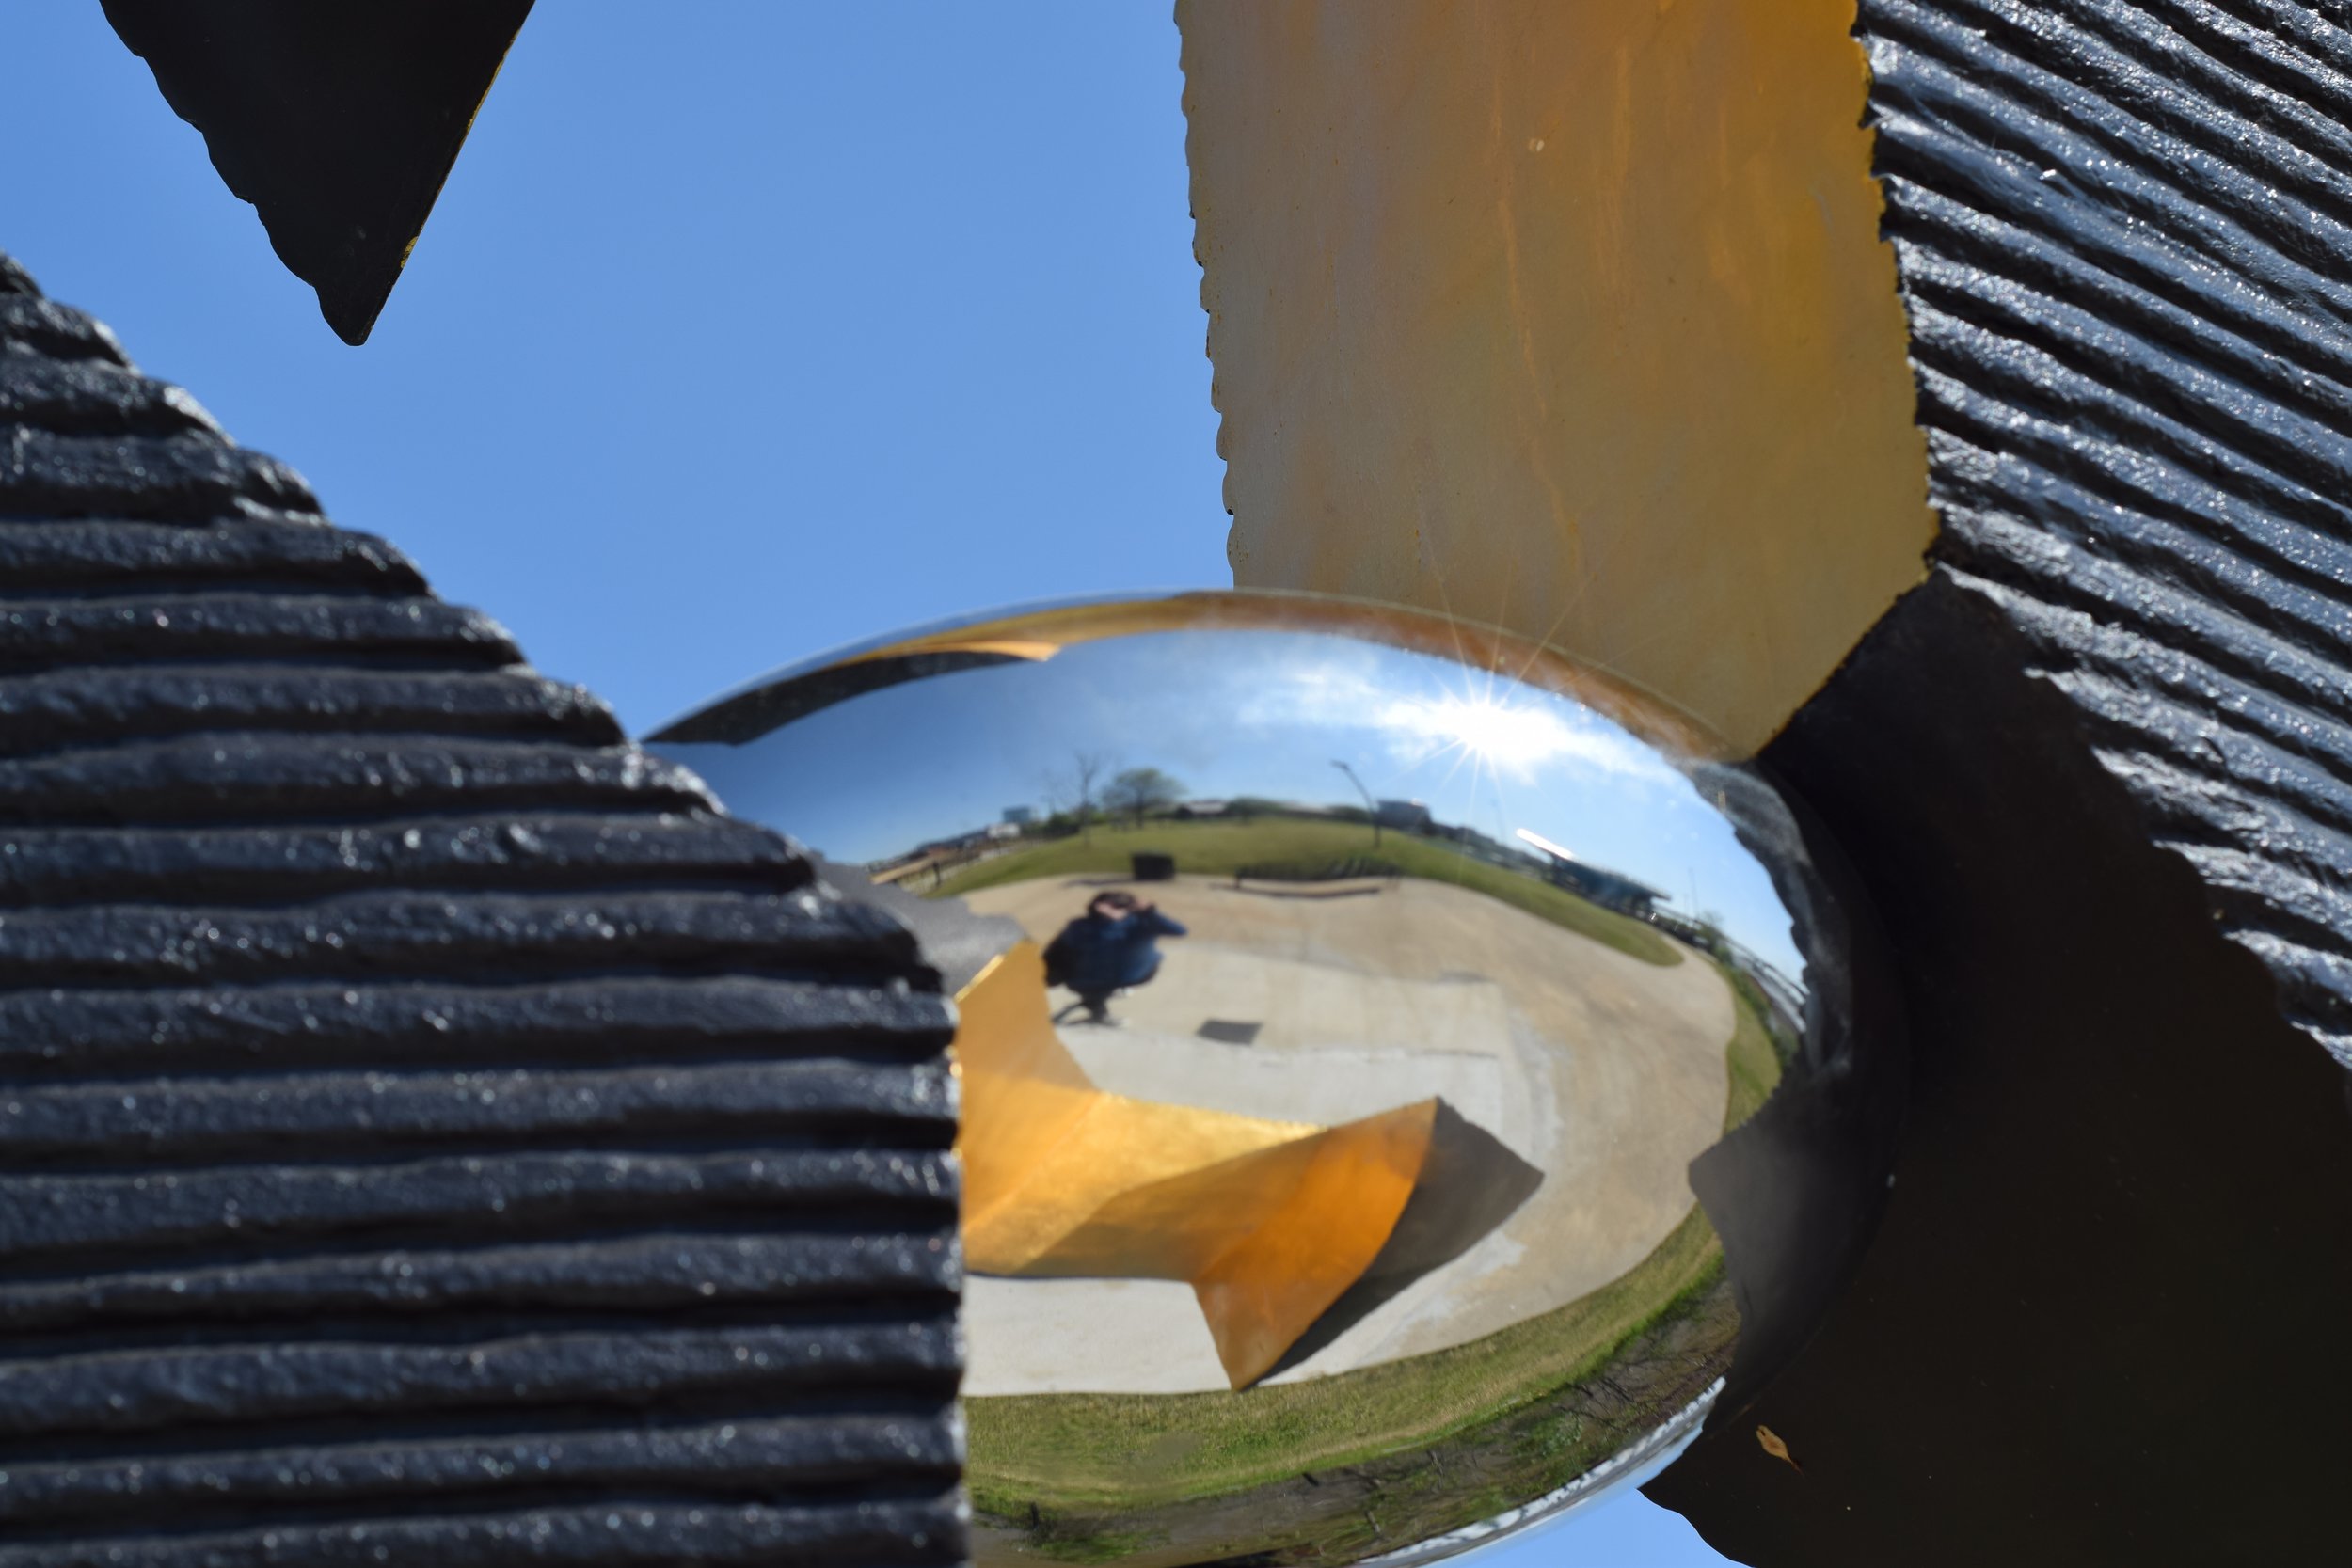 photo by emily reeves dean of a reflection in a sculpture in little rock riverfront park